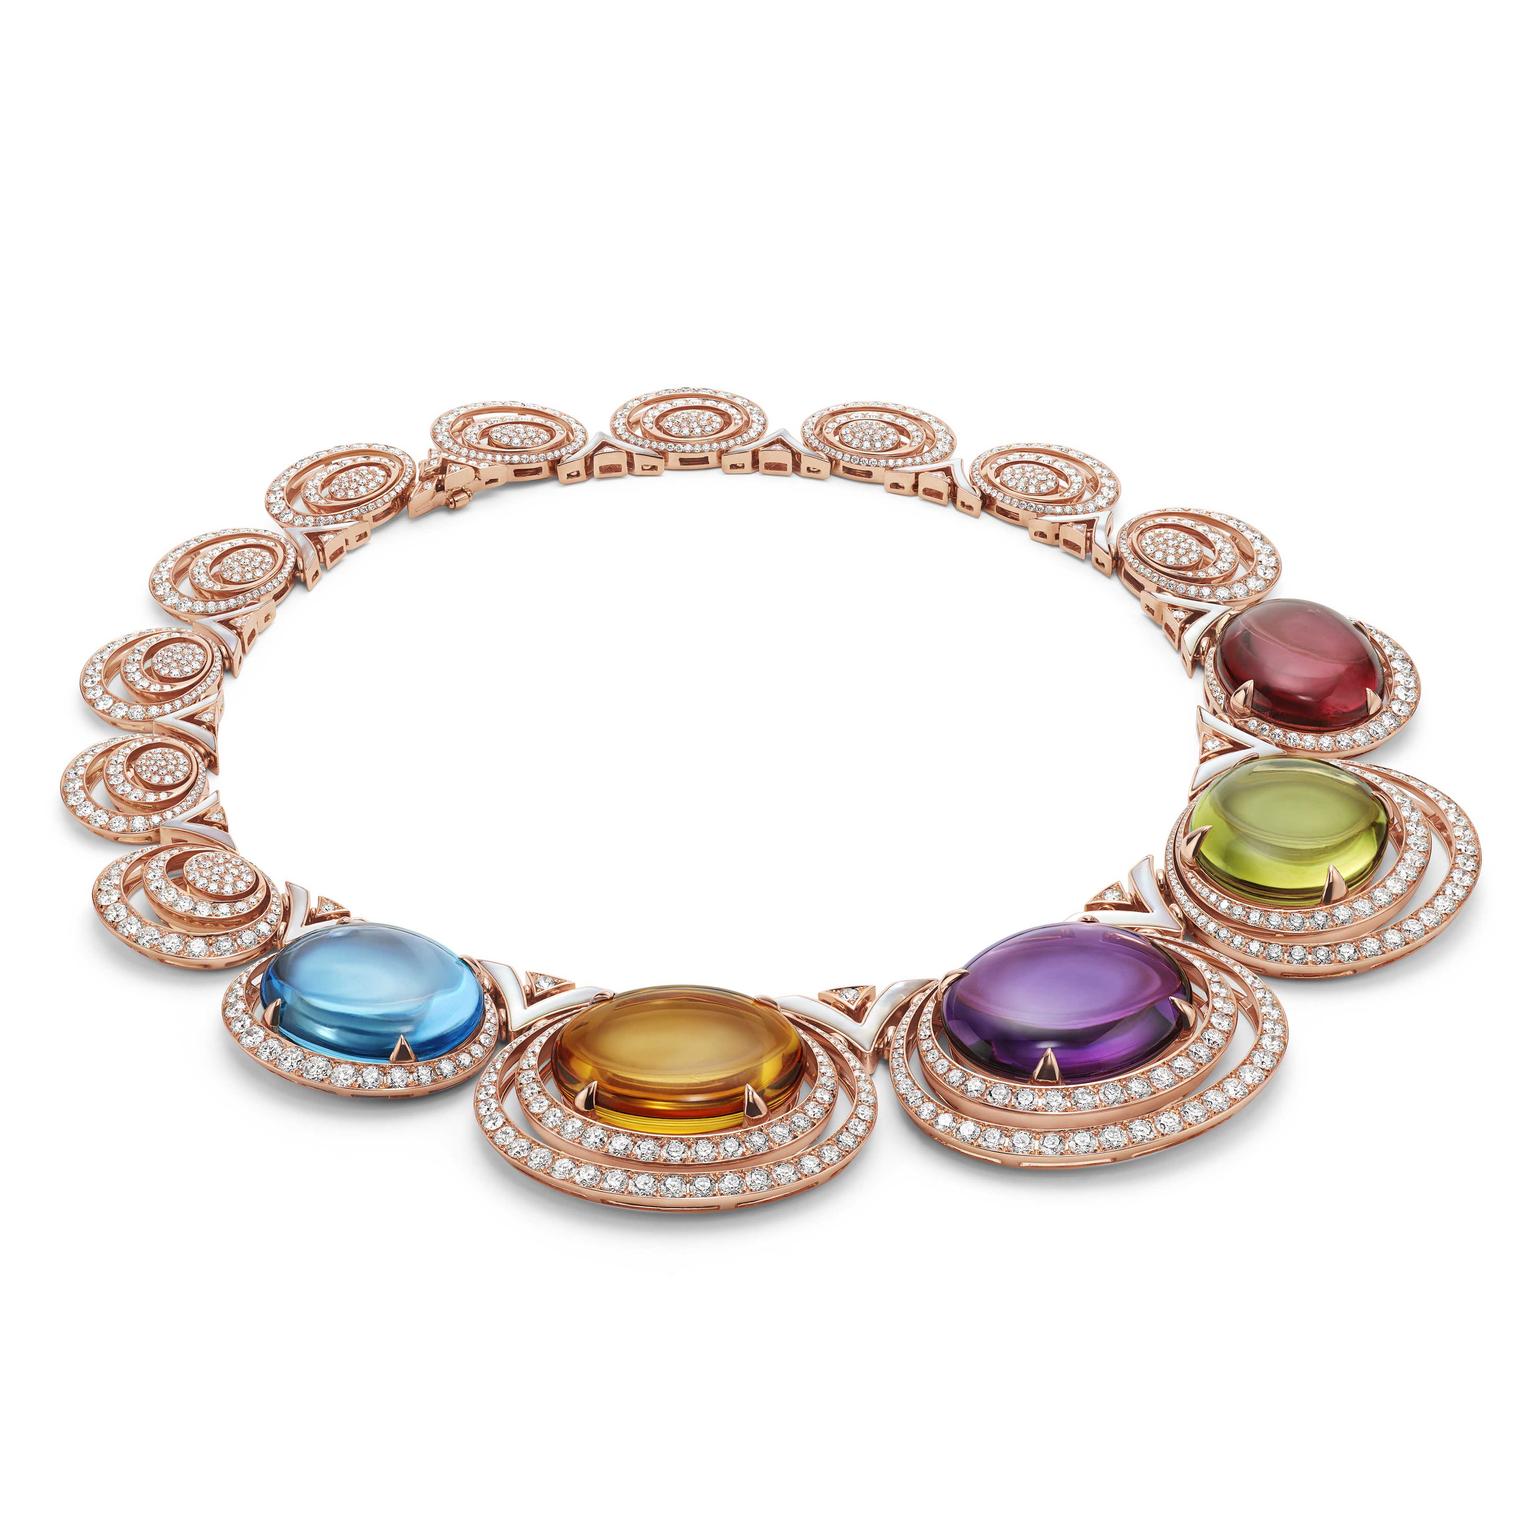 Barocko High Jewellery Necklace with Coloured Gems